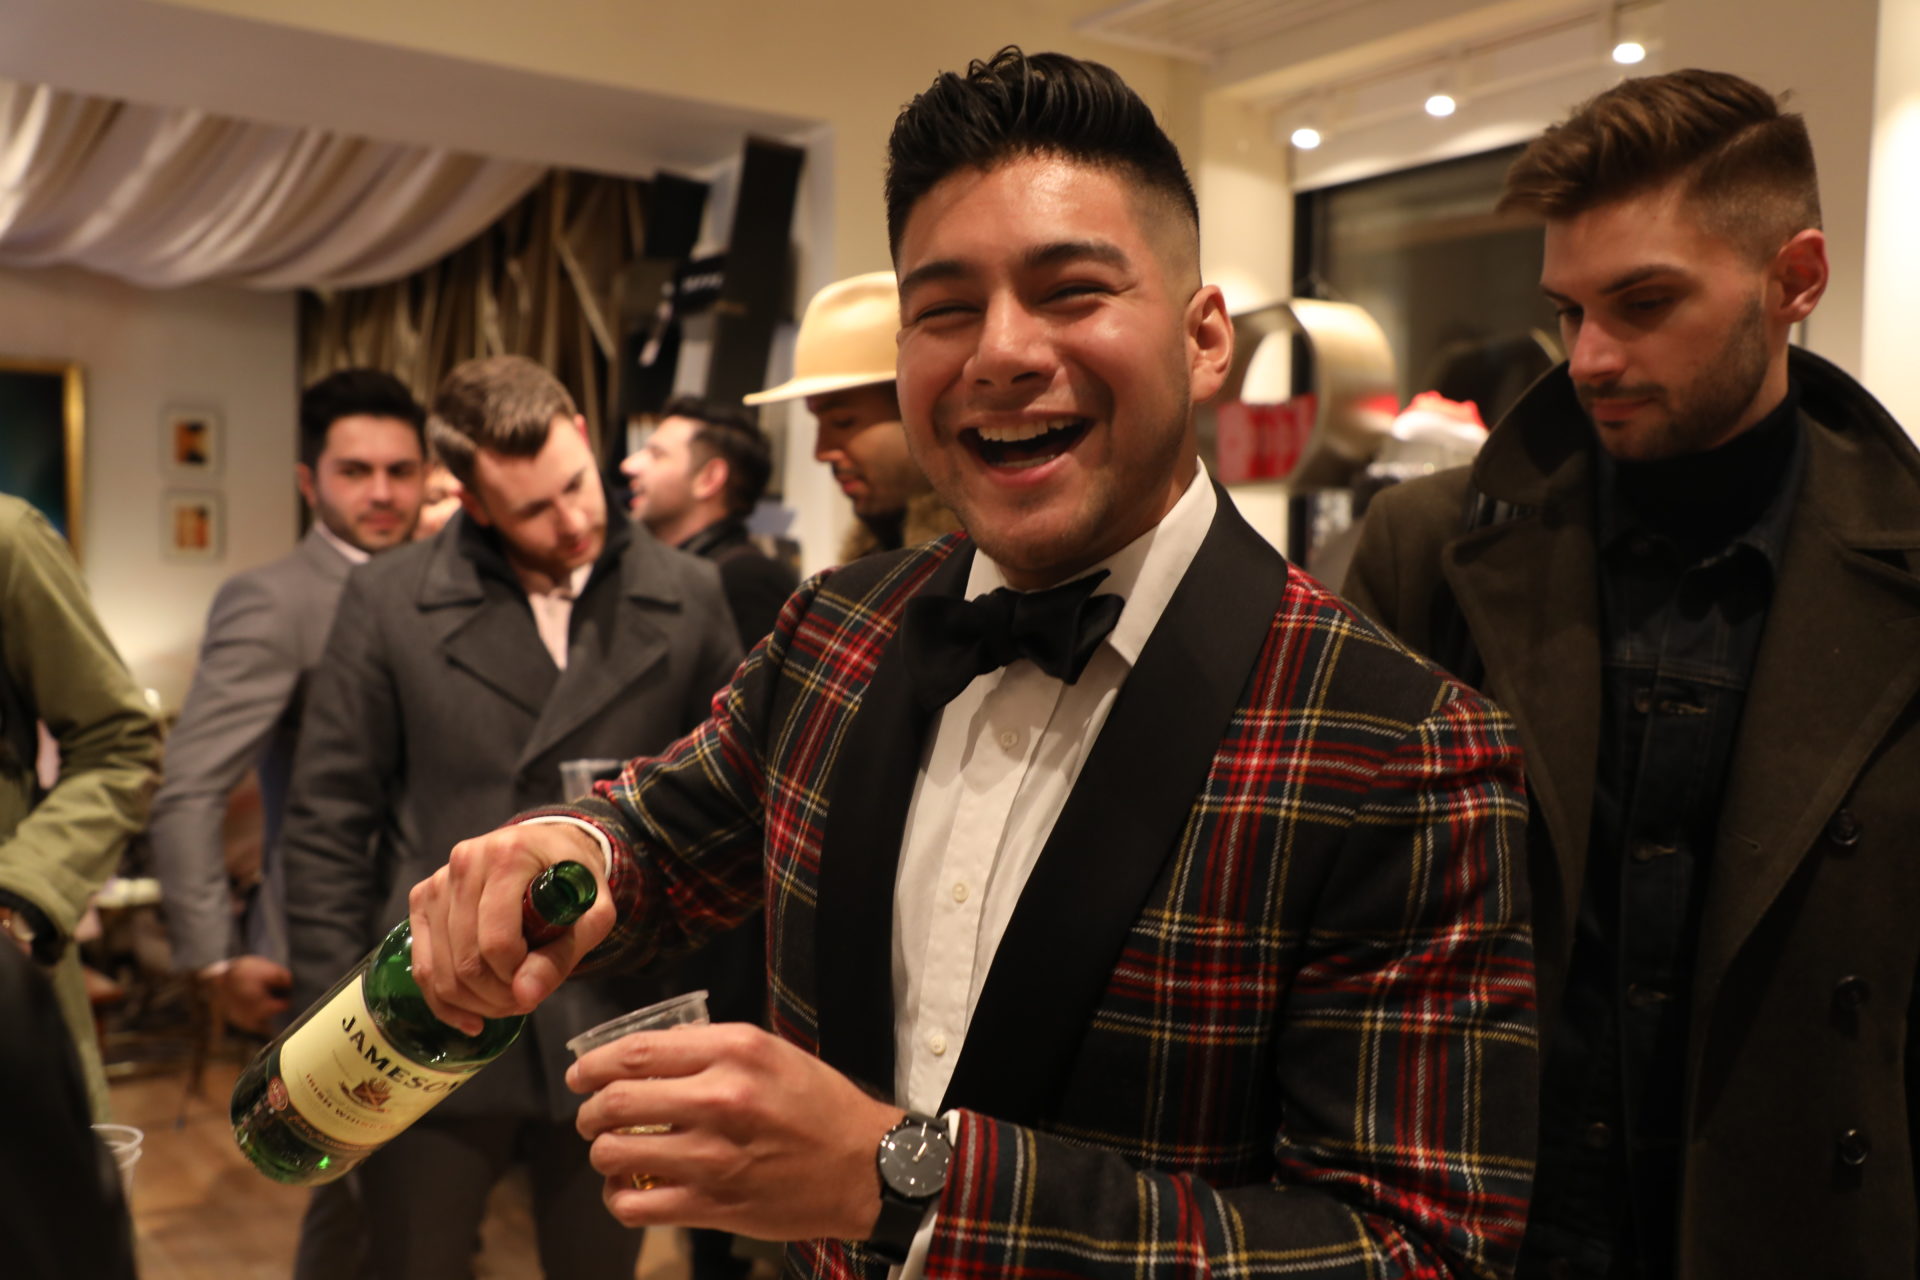 Party, hosting a party, HOSTING A FASHION EVENT FROM YOUR FRIENDS? HOW TO KEEP IT STYLISH - dandy in the bronx